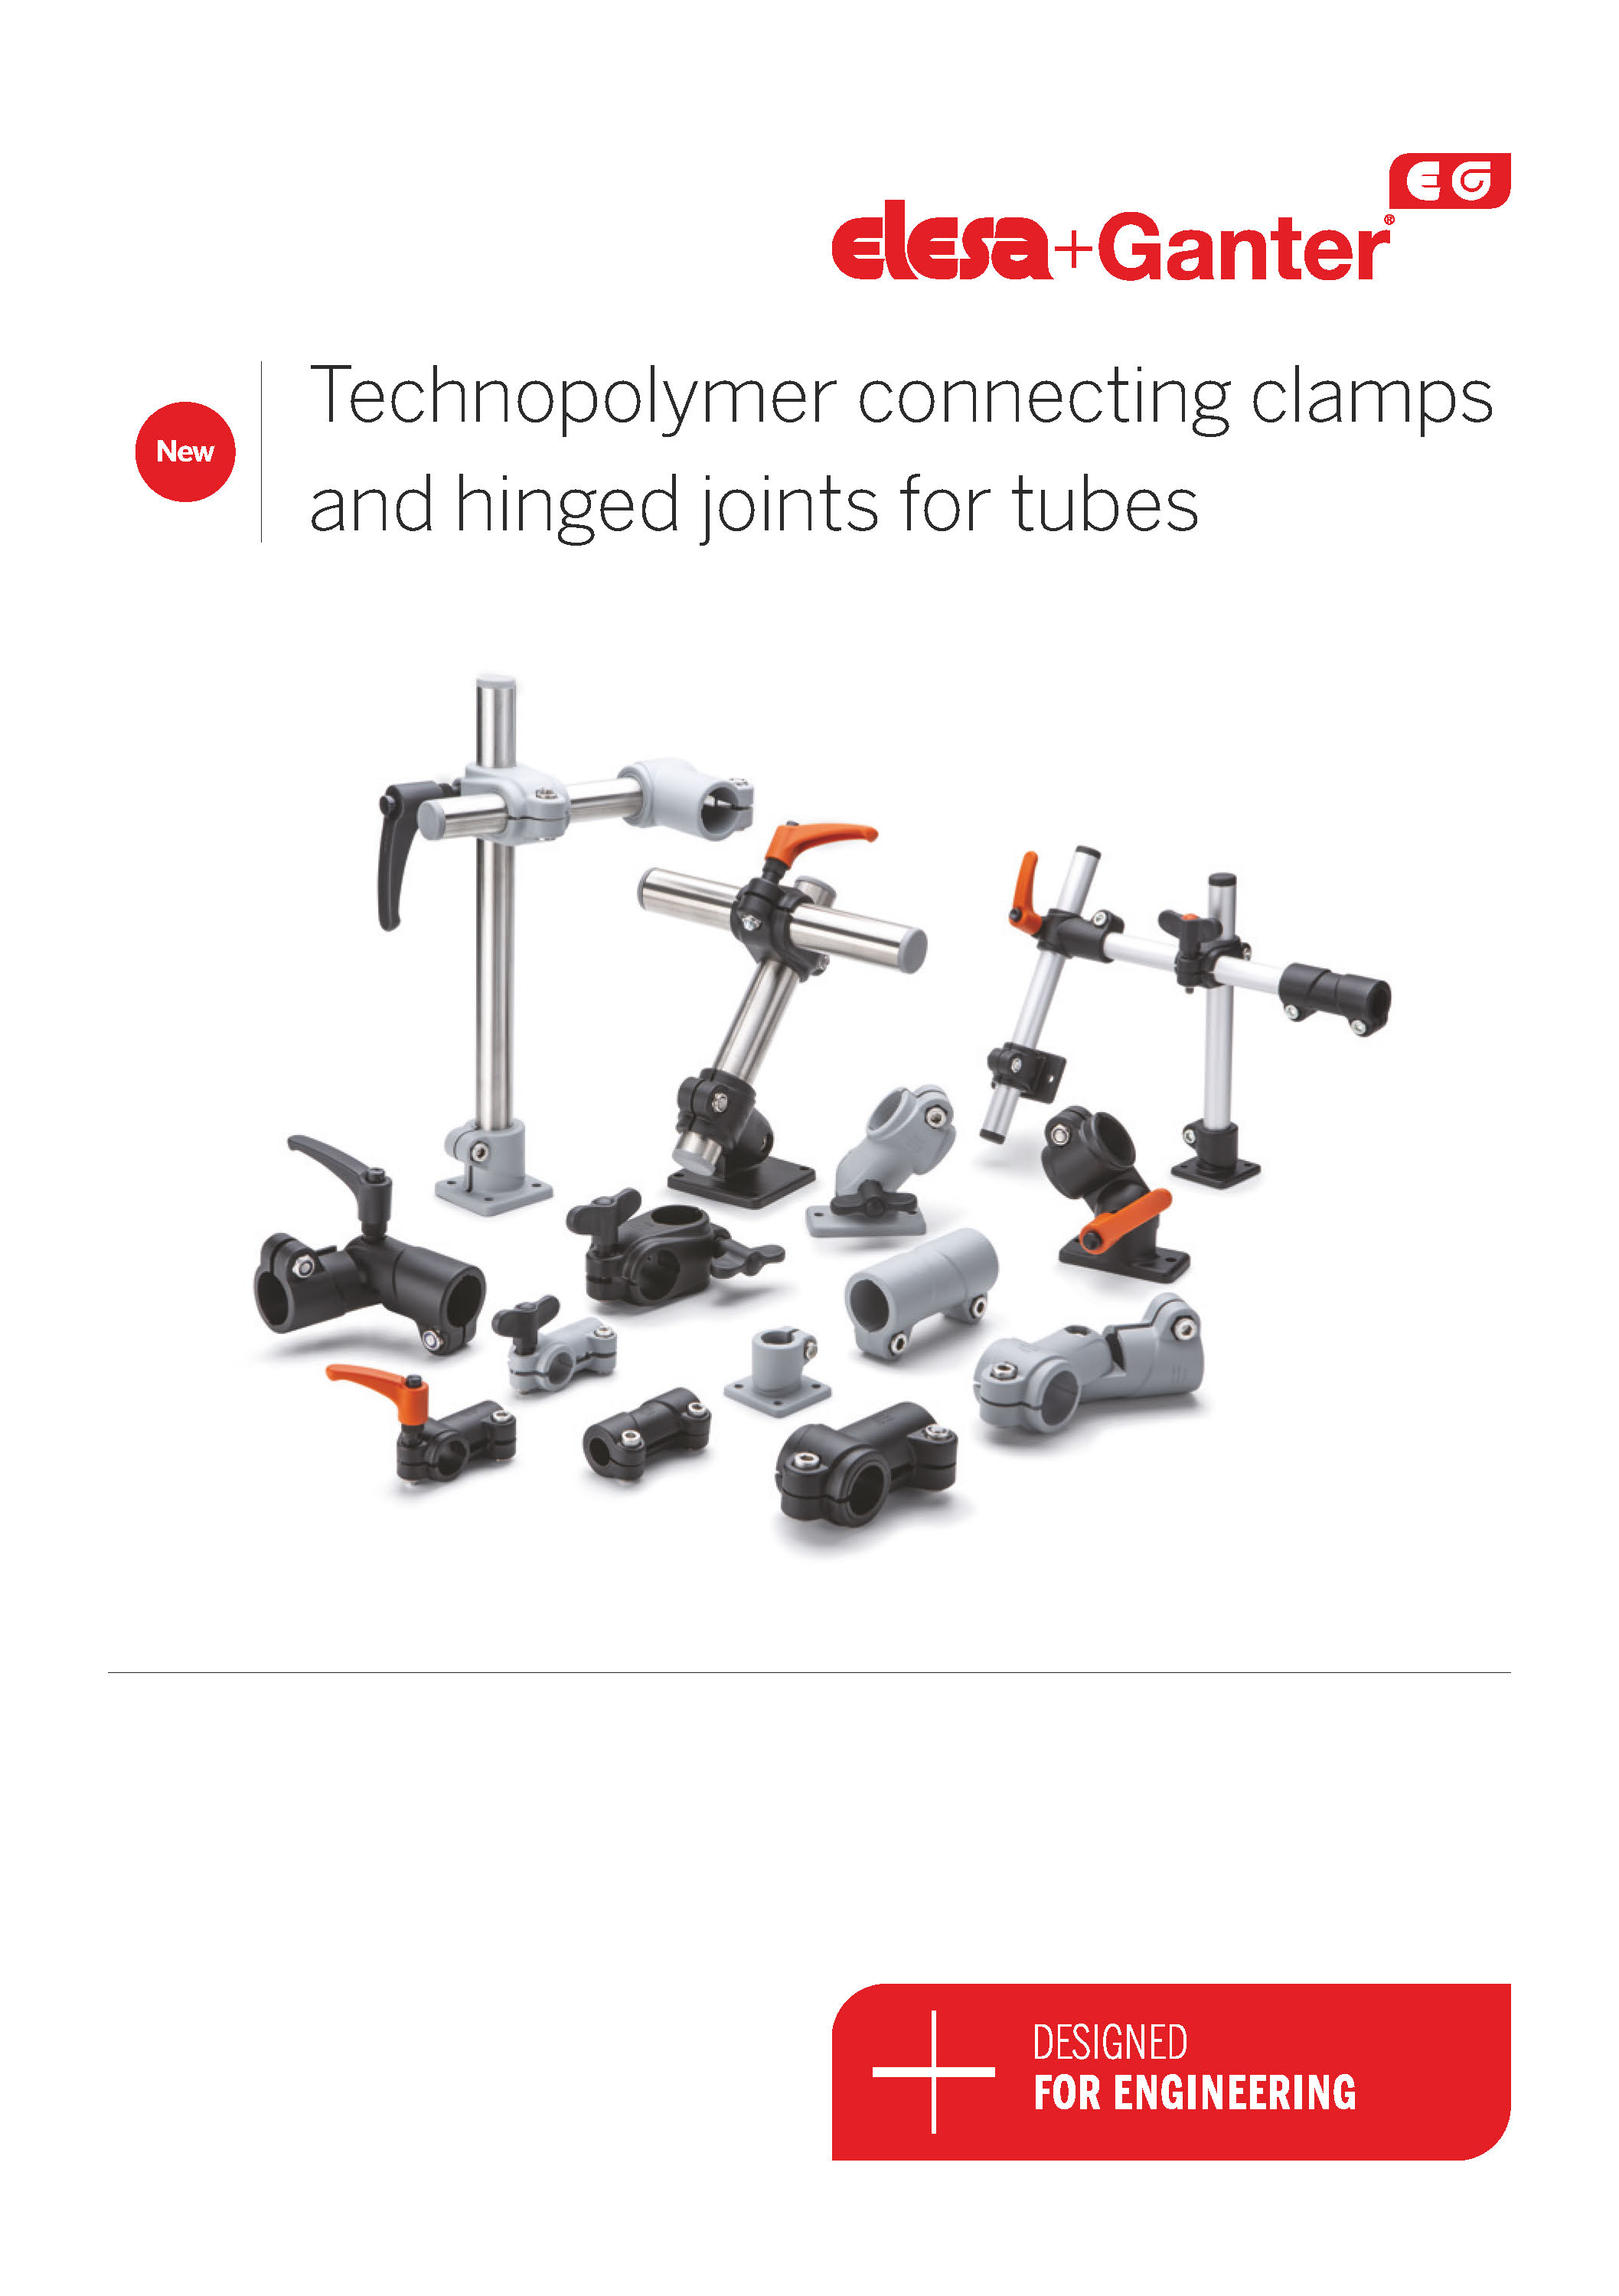 Elesa+Ganter - Technopolymer connecting clamps and hinged joints for tubes